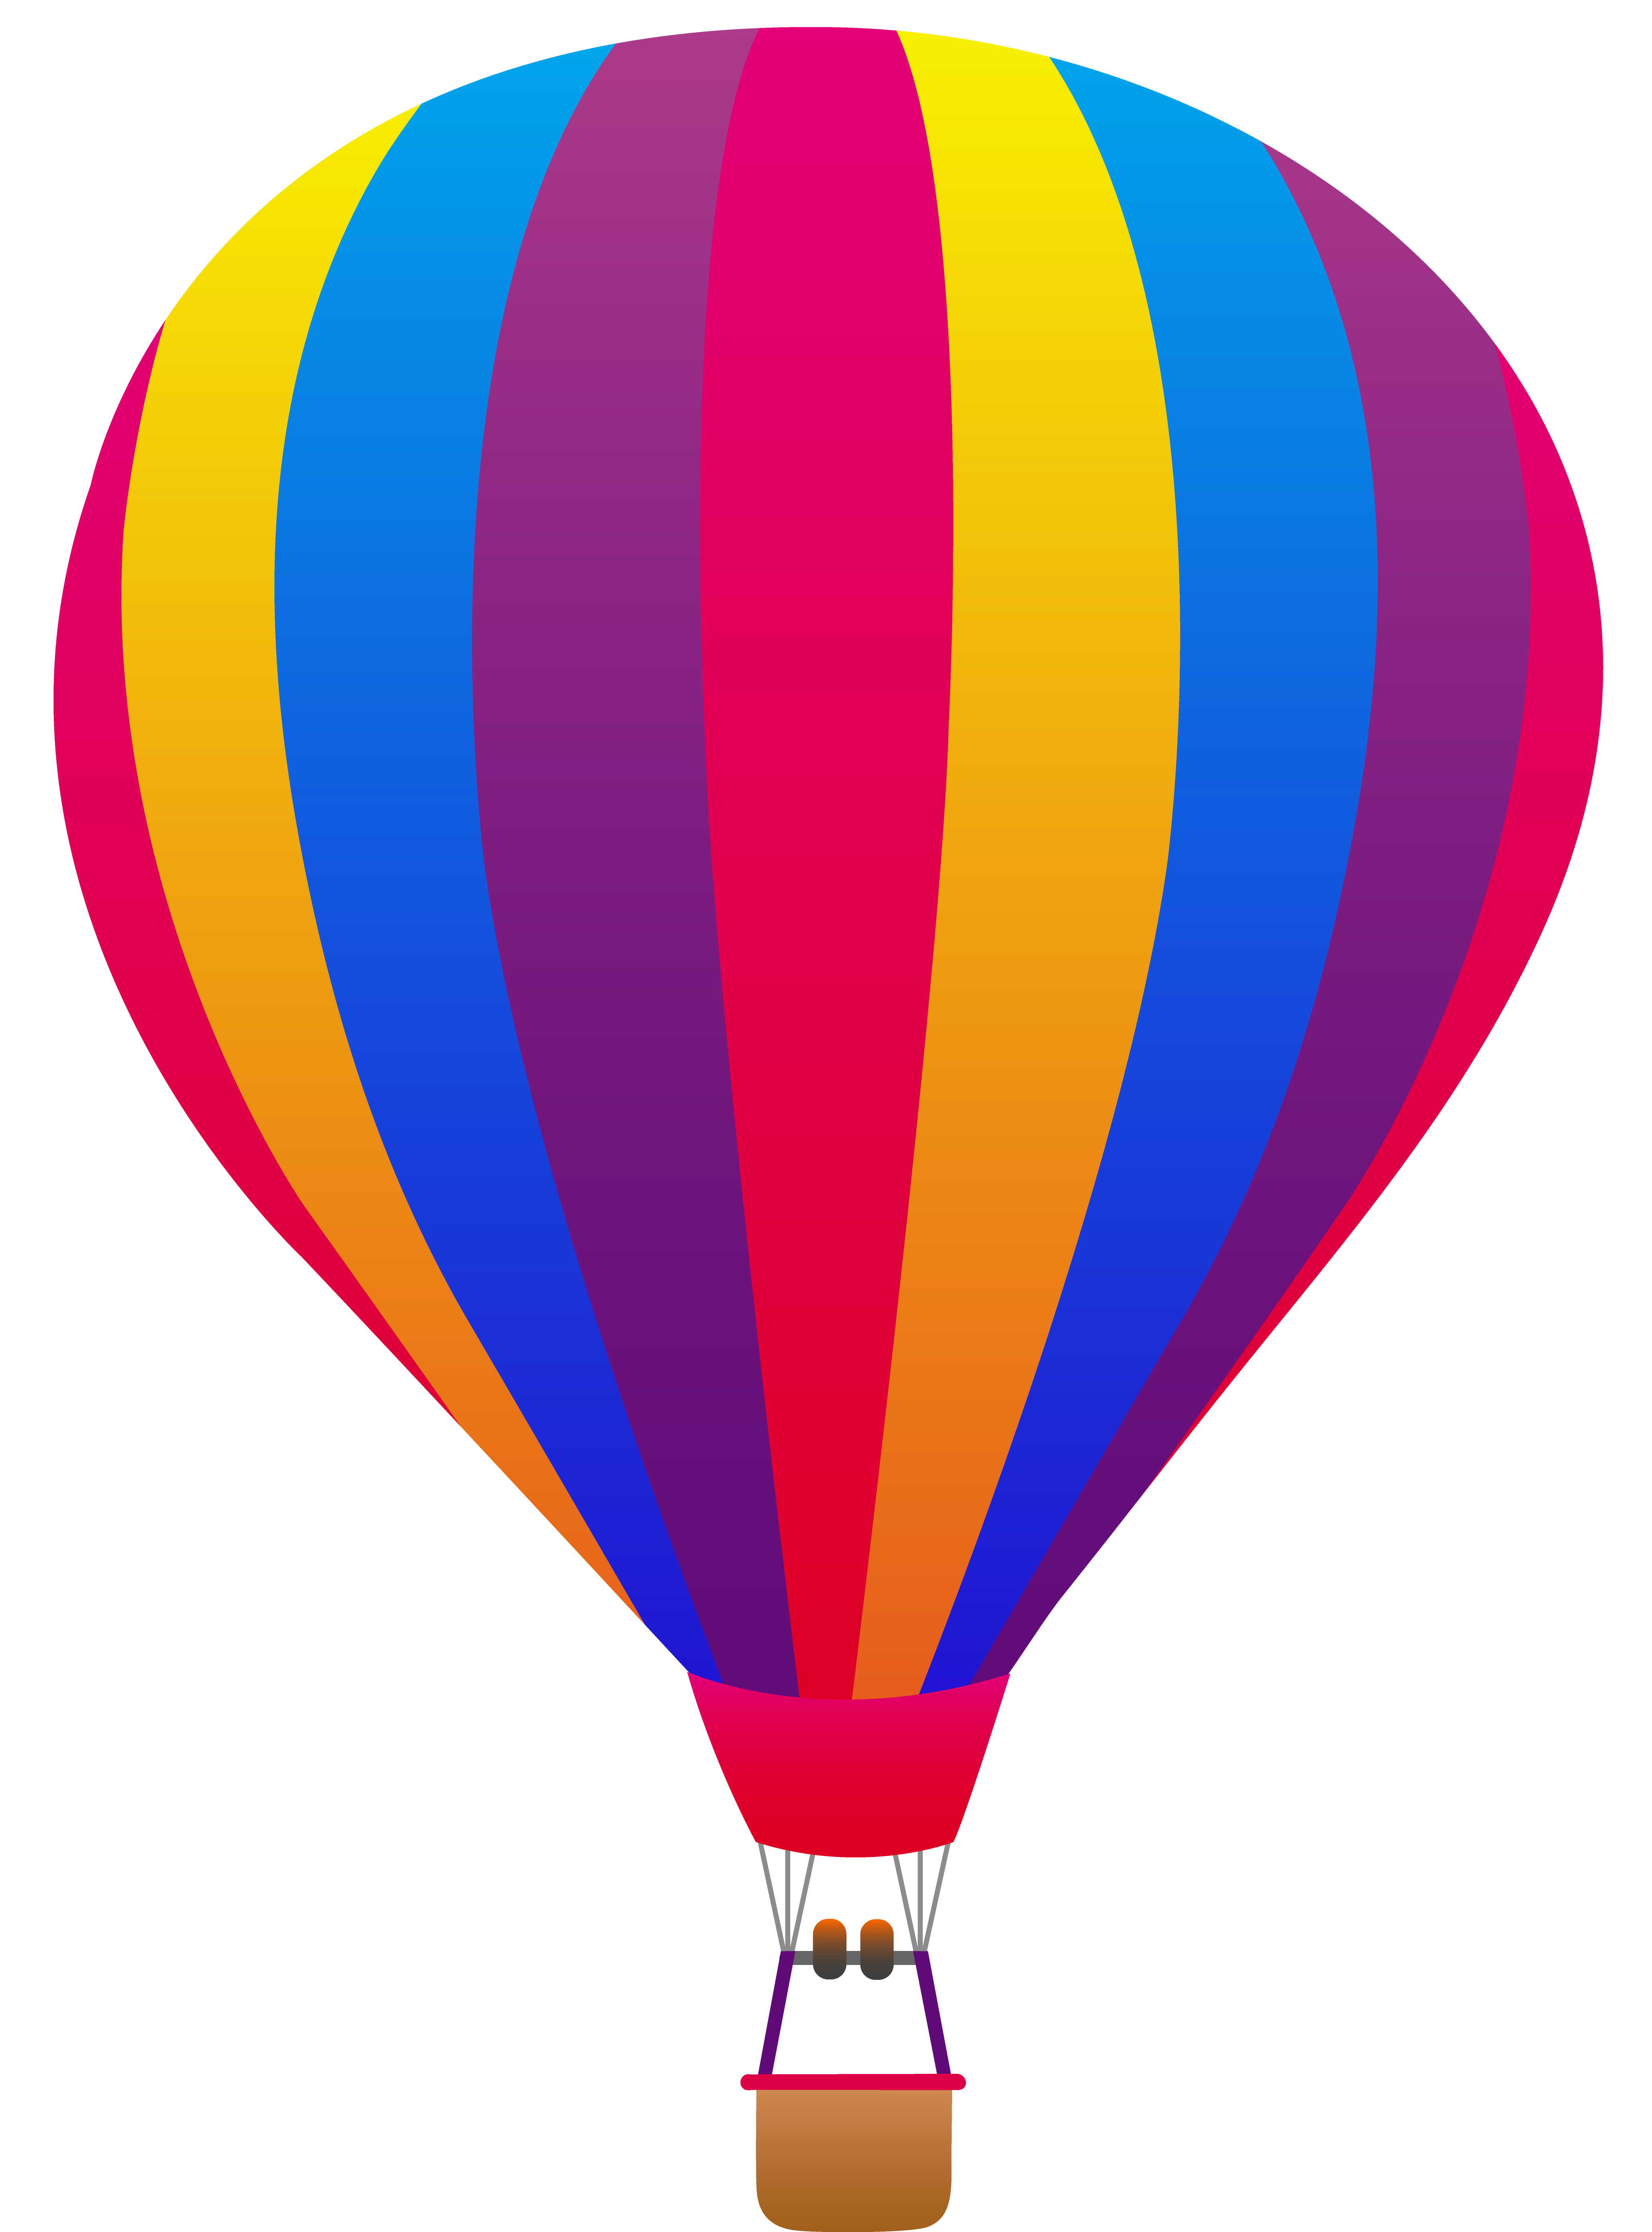 Hot Air Balloon Border Clip Art | Clipart library - Free Clipart Images